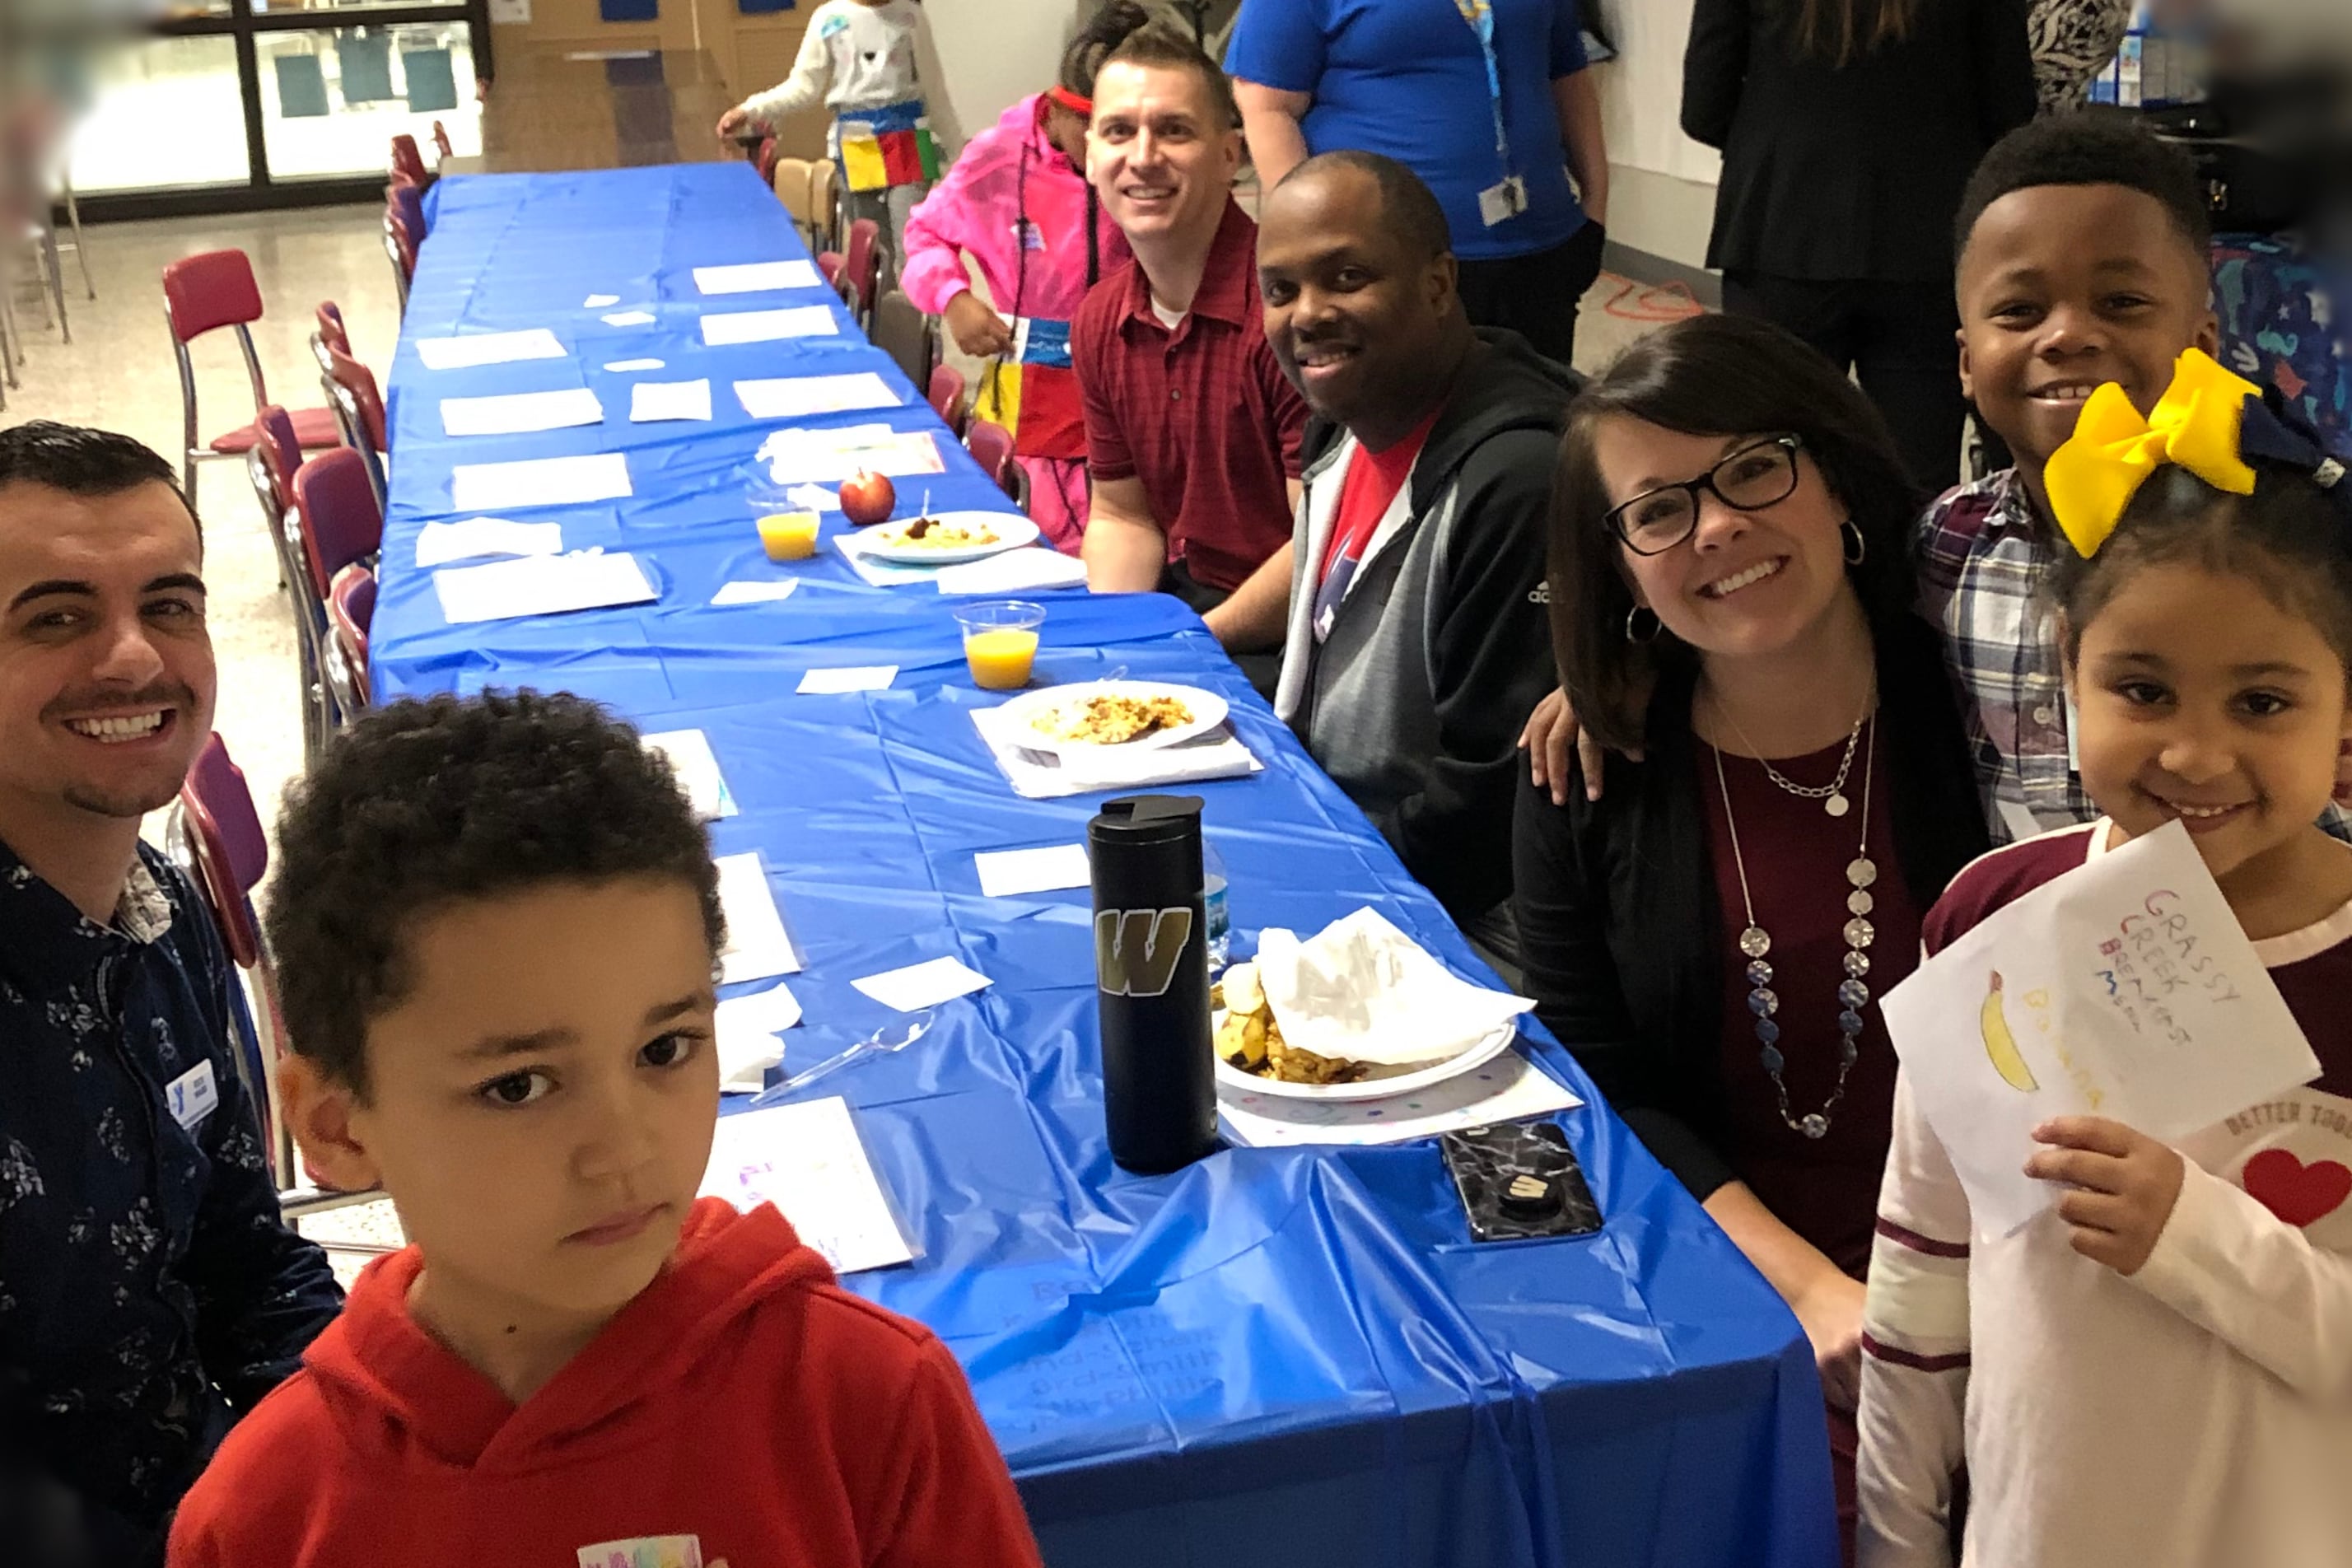 Grassy Creek Elementary School Principal Christy Merchant, students, and staff smile while sitting at a long blue table for breakfast.